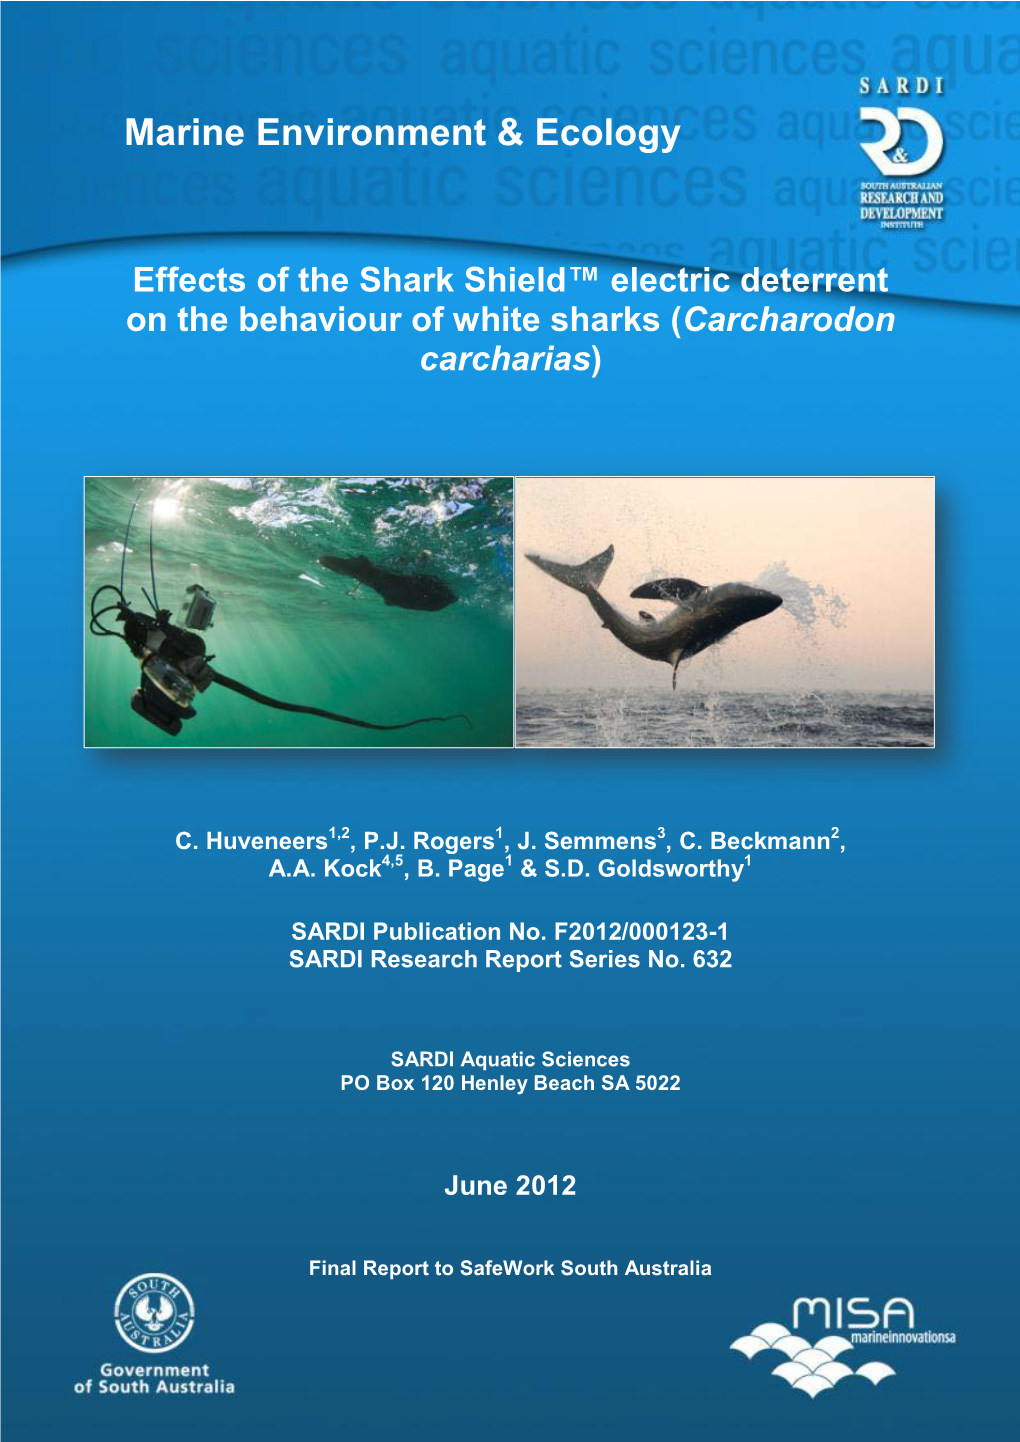 Effects of the Shark Shield™ Electric Deterrent on the Behaviour of White Sharks (Carcharodon Carcharias)